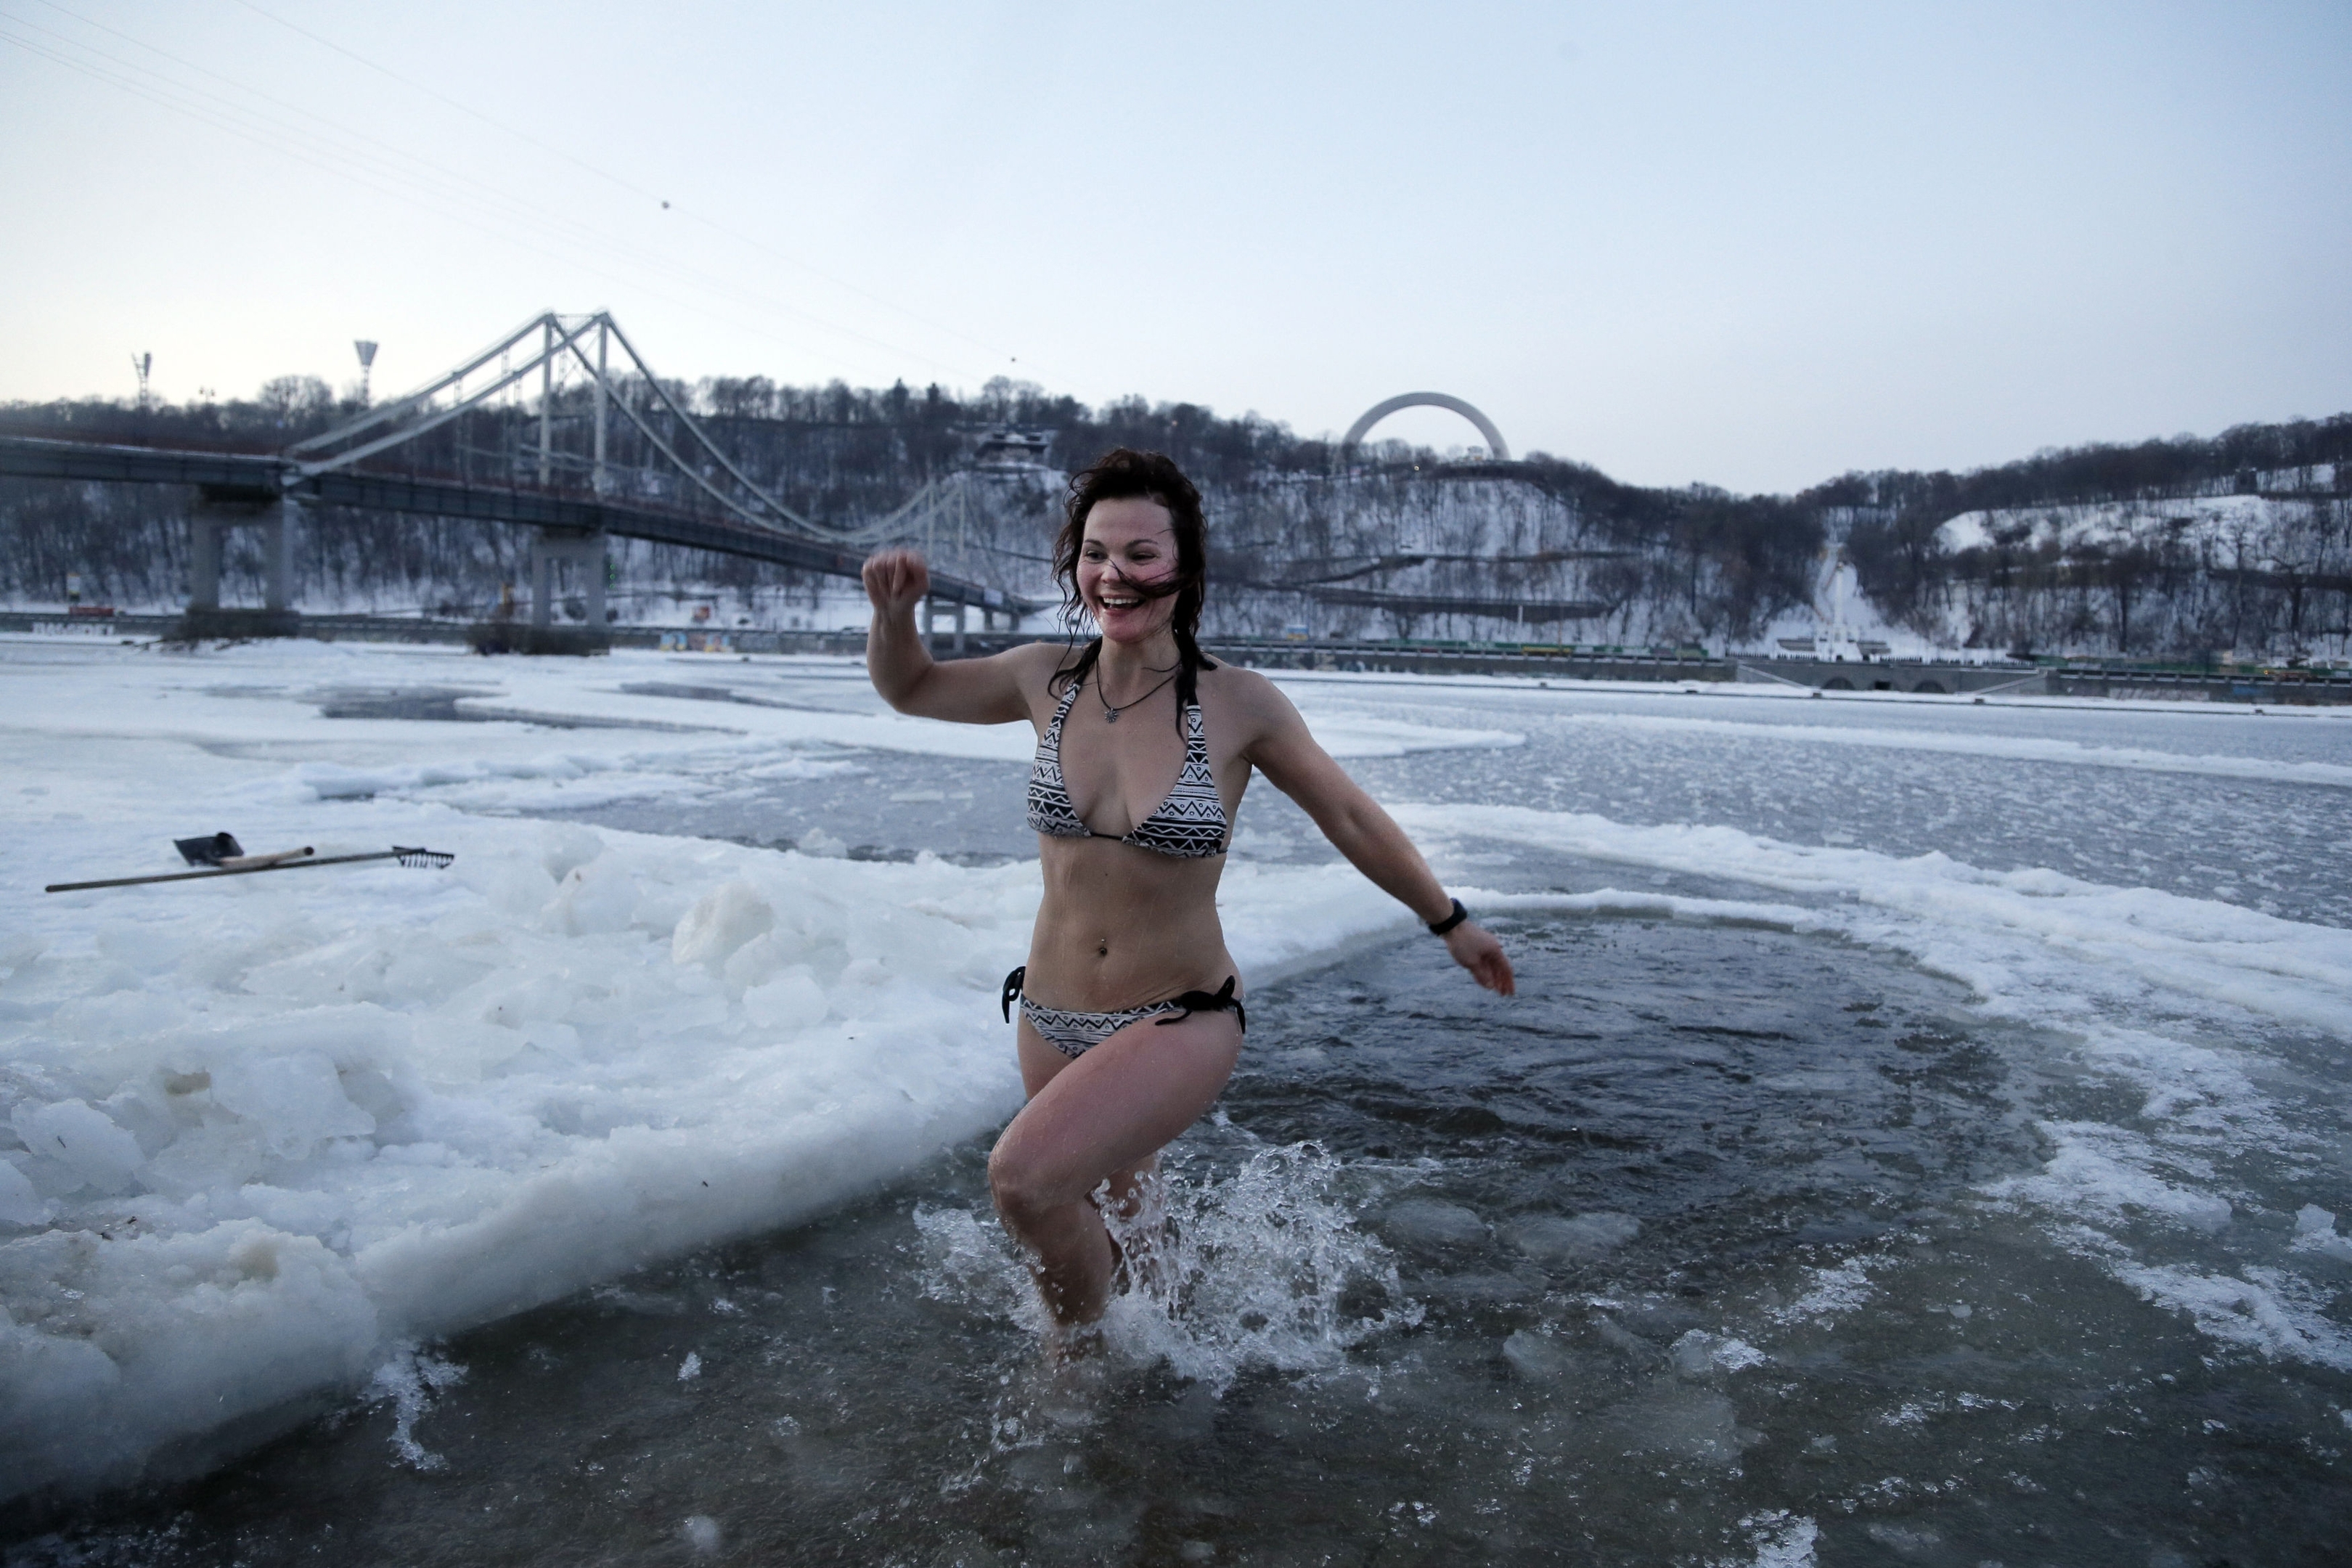 An Orthodox believer plunges in icy water in the Dnipro River during celebrations of the Epiphany in Kiev, Ukraine, Tuesday, Jan. 19, 2016. Orthodox believers celebrate the holiday of the Epiphany on Jan. 19, and traditionally bathe in holes cut through thick ice on rivers and ponds to cleanse themselves with water deemed holy for the day. (AP Photo/Efrem Lukatsky)